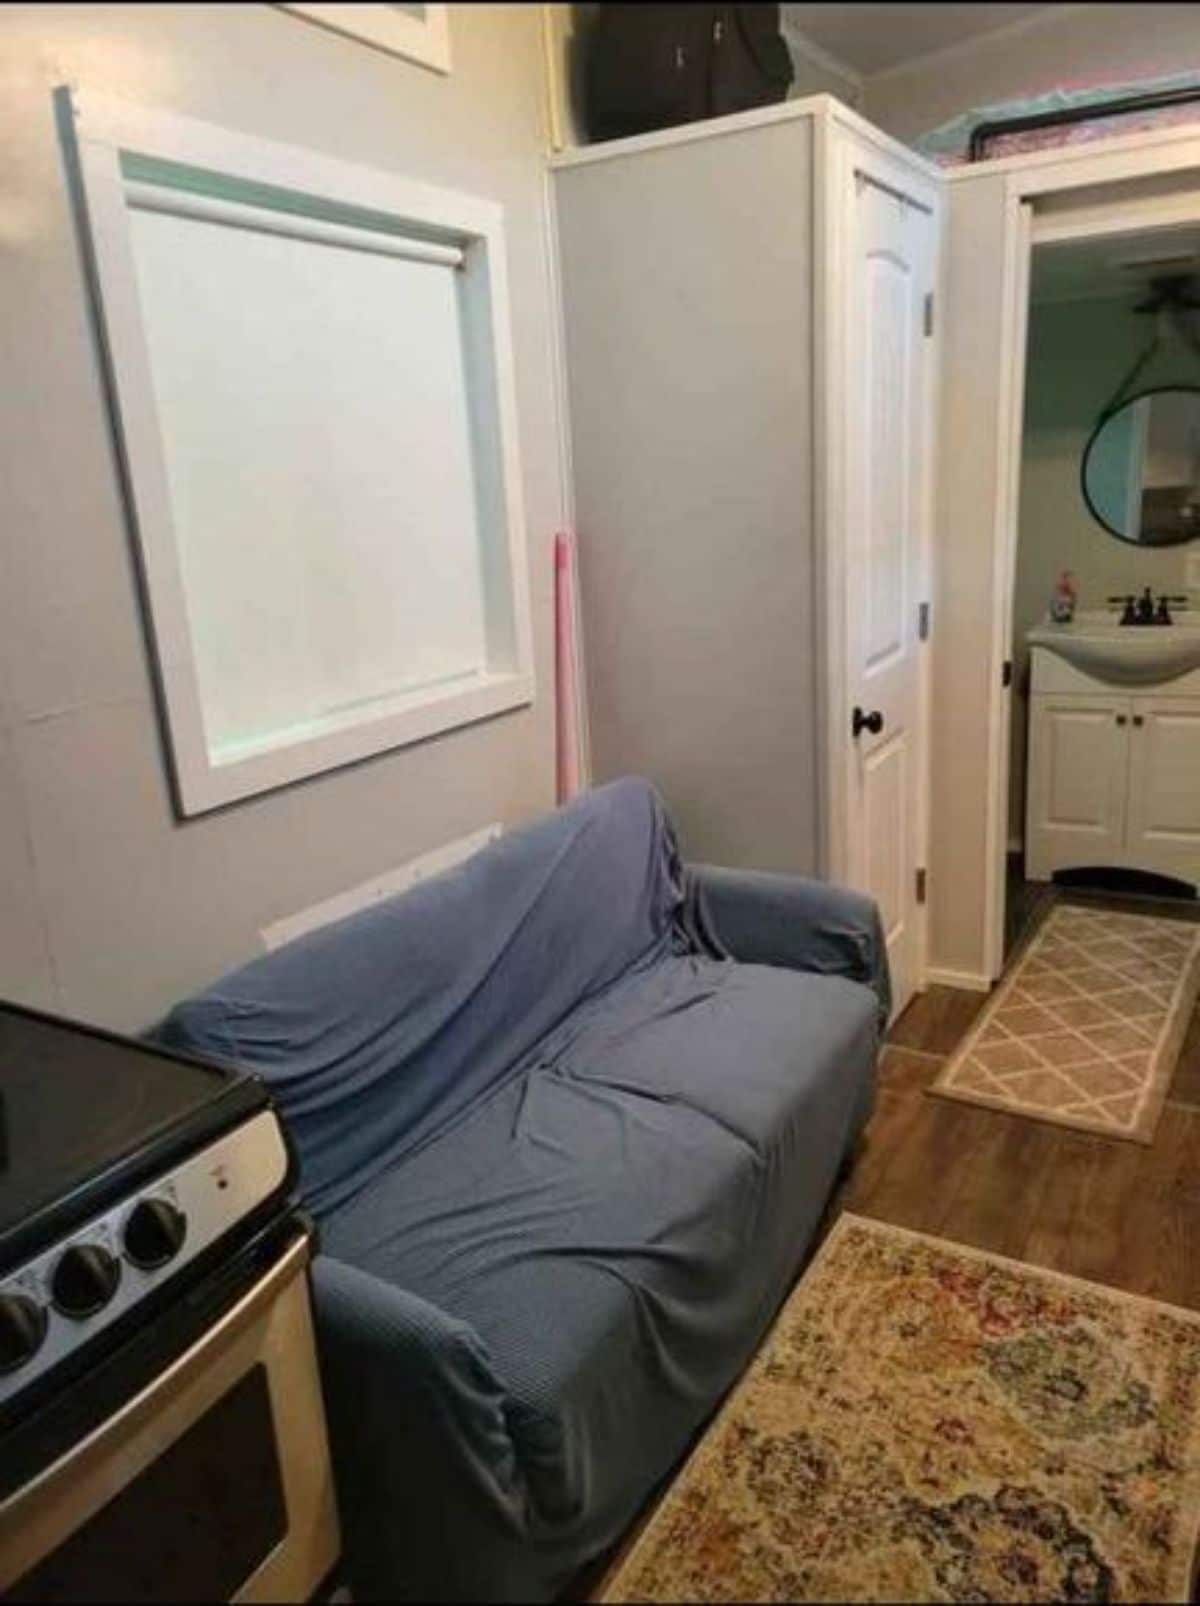 Living area of 20’ Tiny House has a small couch